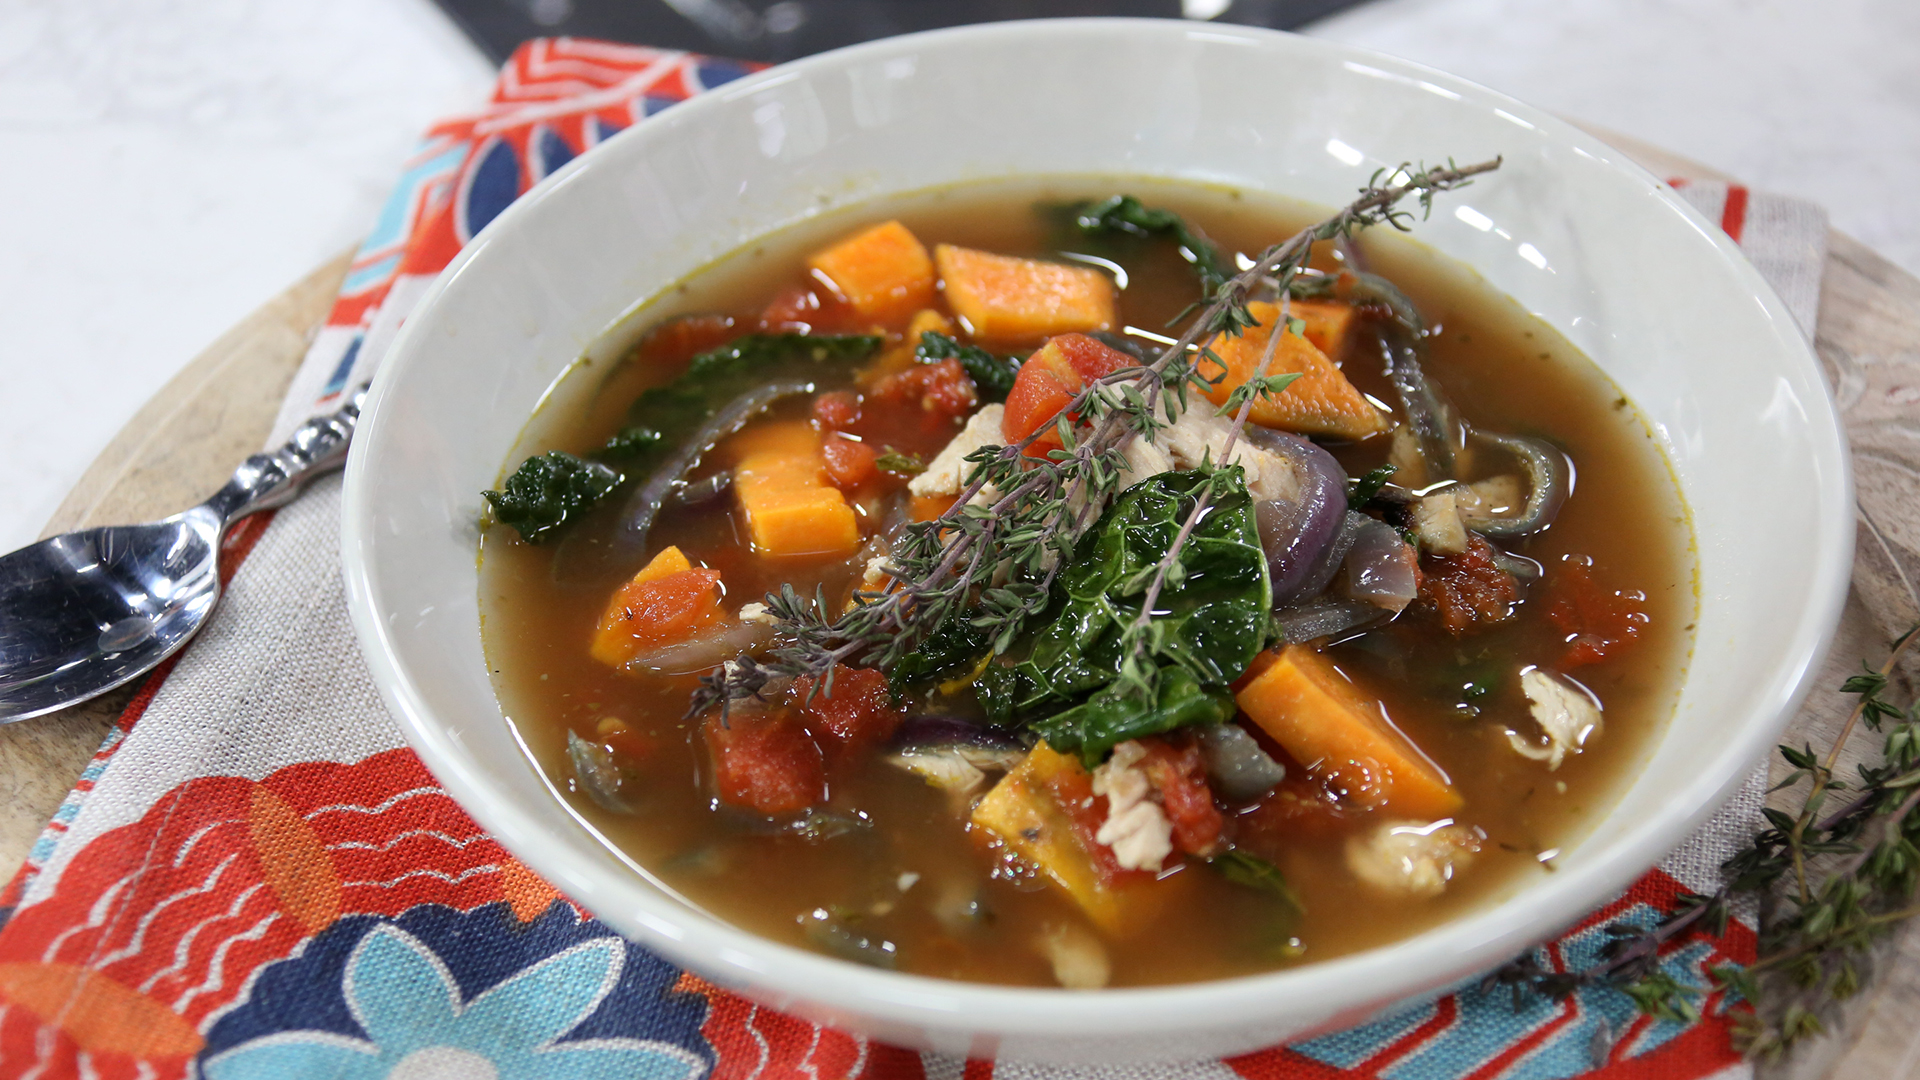 Chicken, kale and sweet potato soup